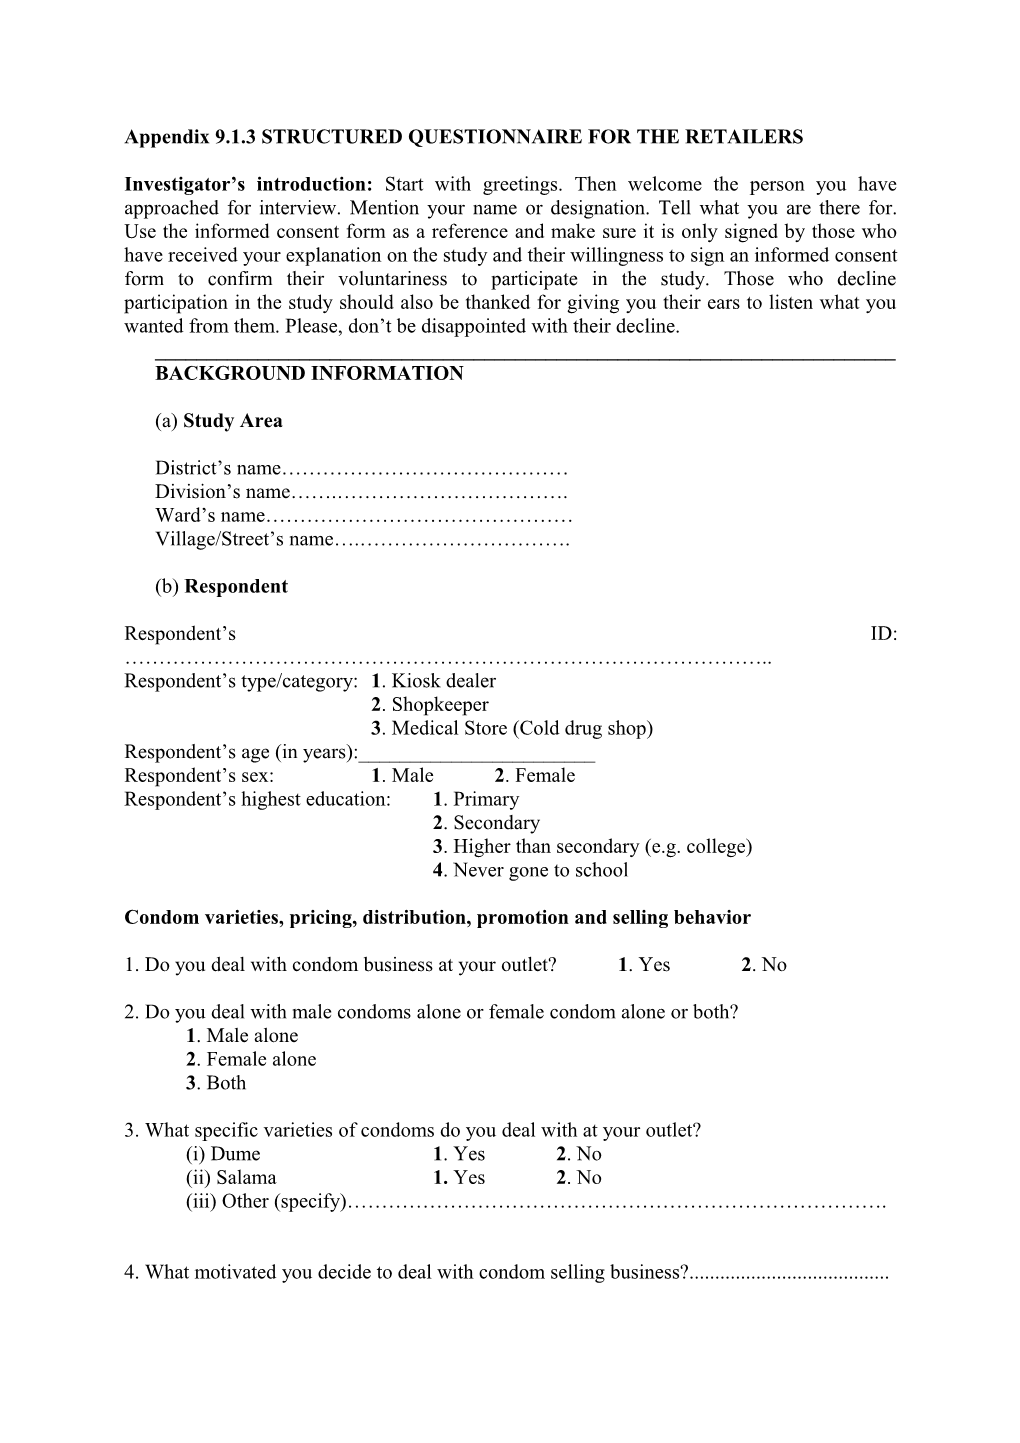 Appendix 9.1.3 STRUCTURED QUESTIONNAIRE for the RETAILERS